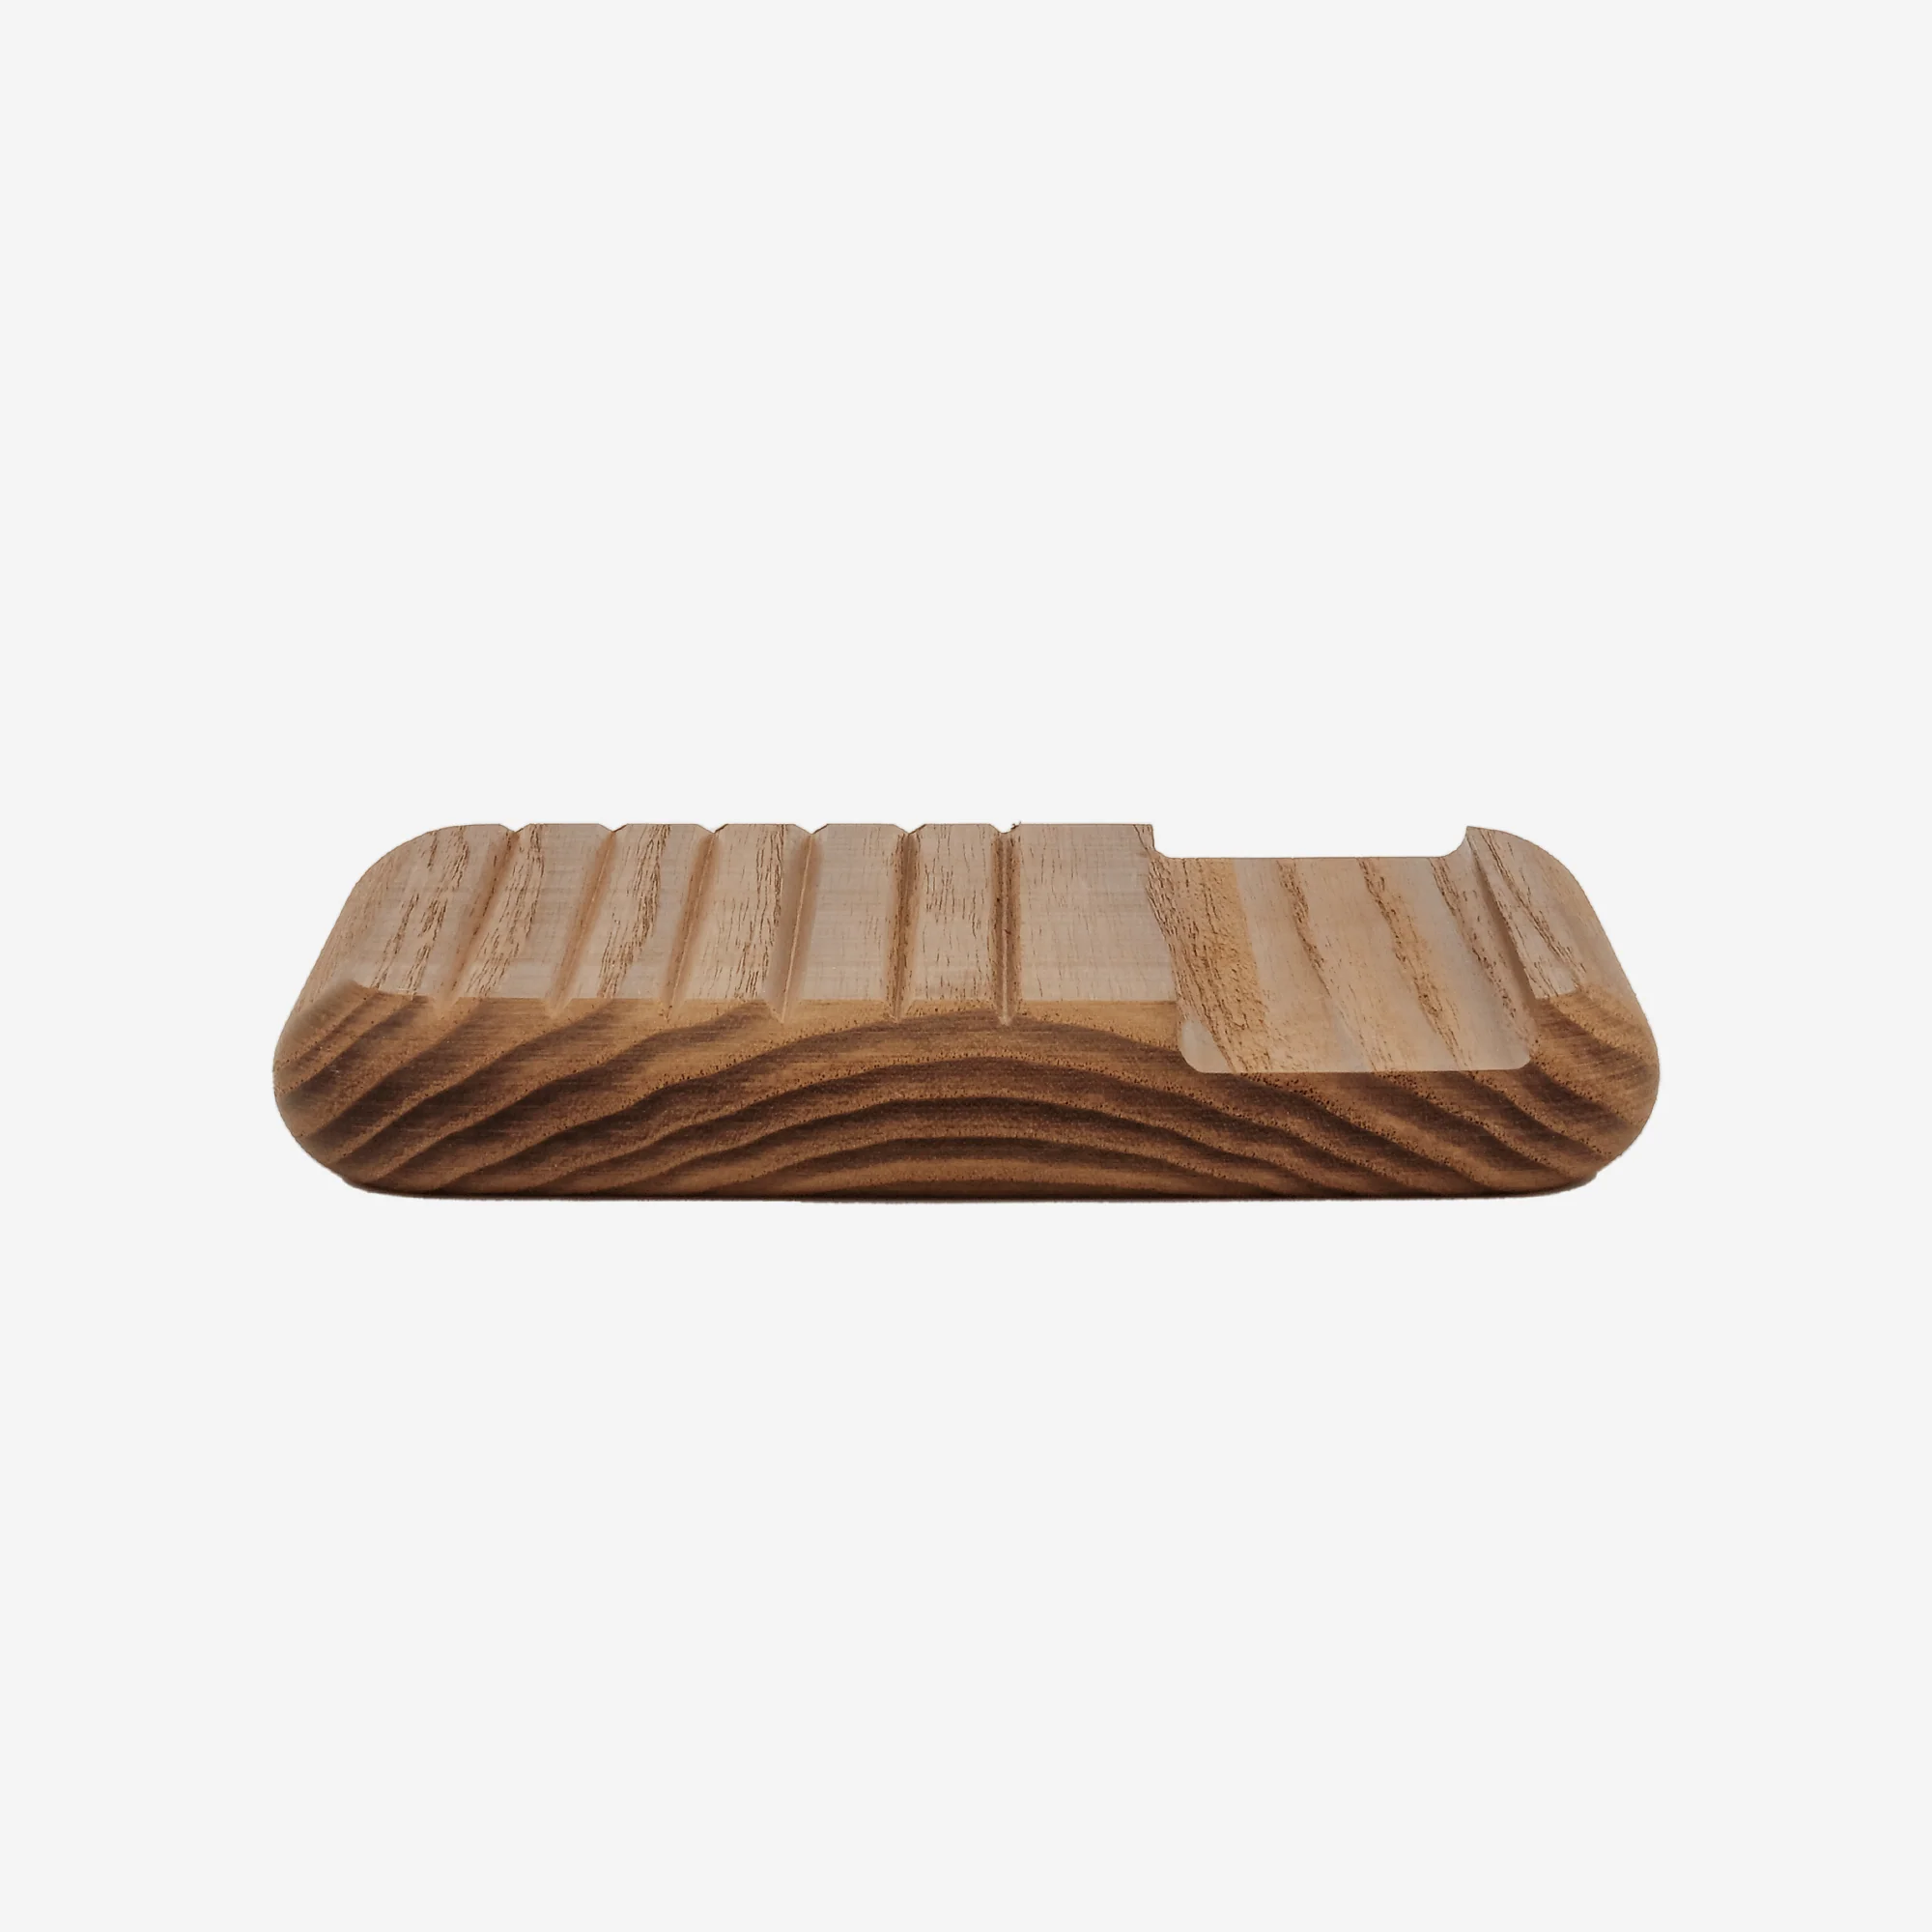 Andrée Jardin Heritage Ash Soap Holder Andrée Jardin Andrée Jardin Back in stock Bath & Body_Accessories Brand_Andrée Jardin Home_Household Cleaning Kitchen_Accessories Le Bain Summer Clean Up soap-dish-andree-jardin-7041_2000x2000_47ae80b4-fbd2-4019-9d3b-76675195384d